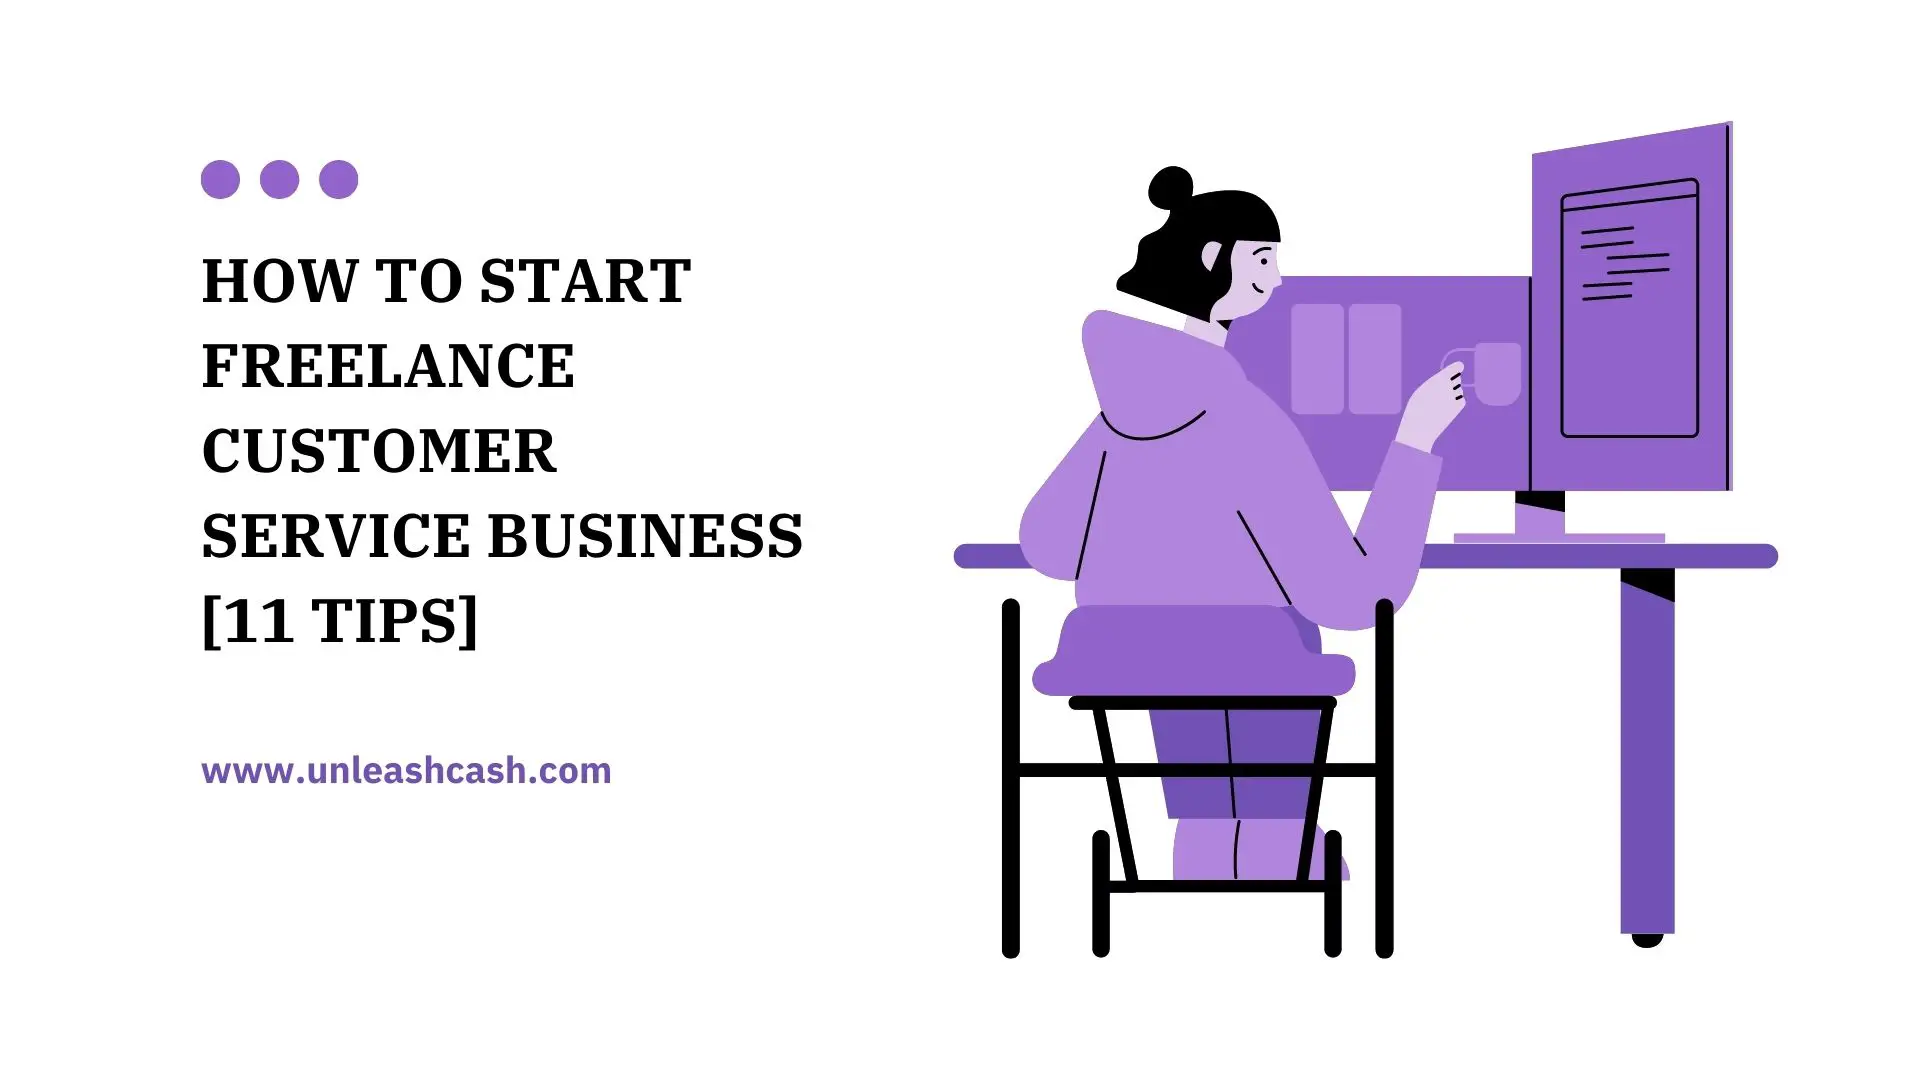 How To Start Freelance Customer Service Business [11 Tips]